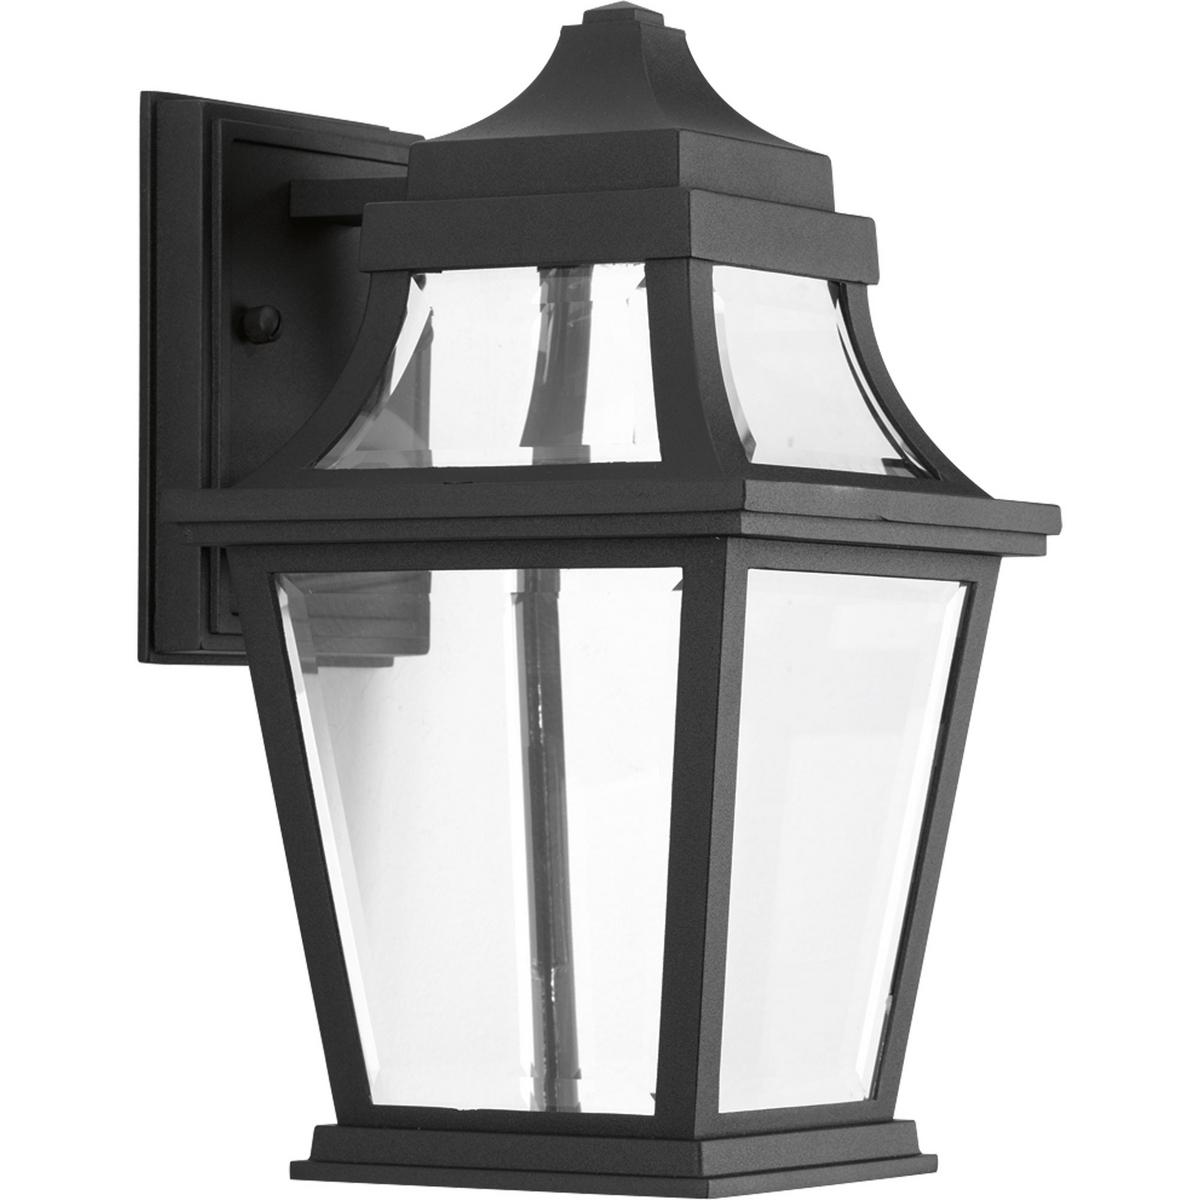 Hubbell P6056-3130K9 Endorse celebrates the traditional form of a gas-powered coach light with illumination from an LED source. A die-cast aluminum, powdered coated frame created and intriguing visual effect with the clear beveled glass. An optional fluted glass column is off